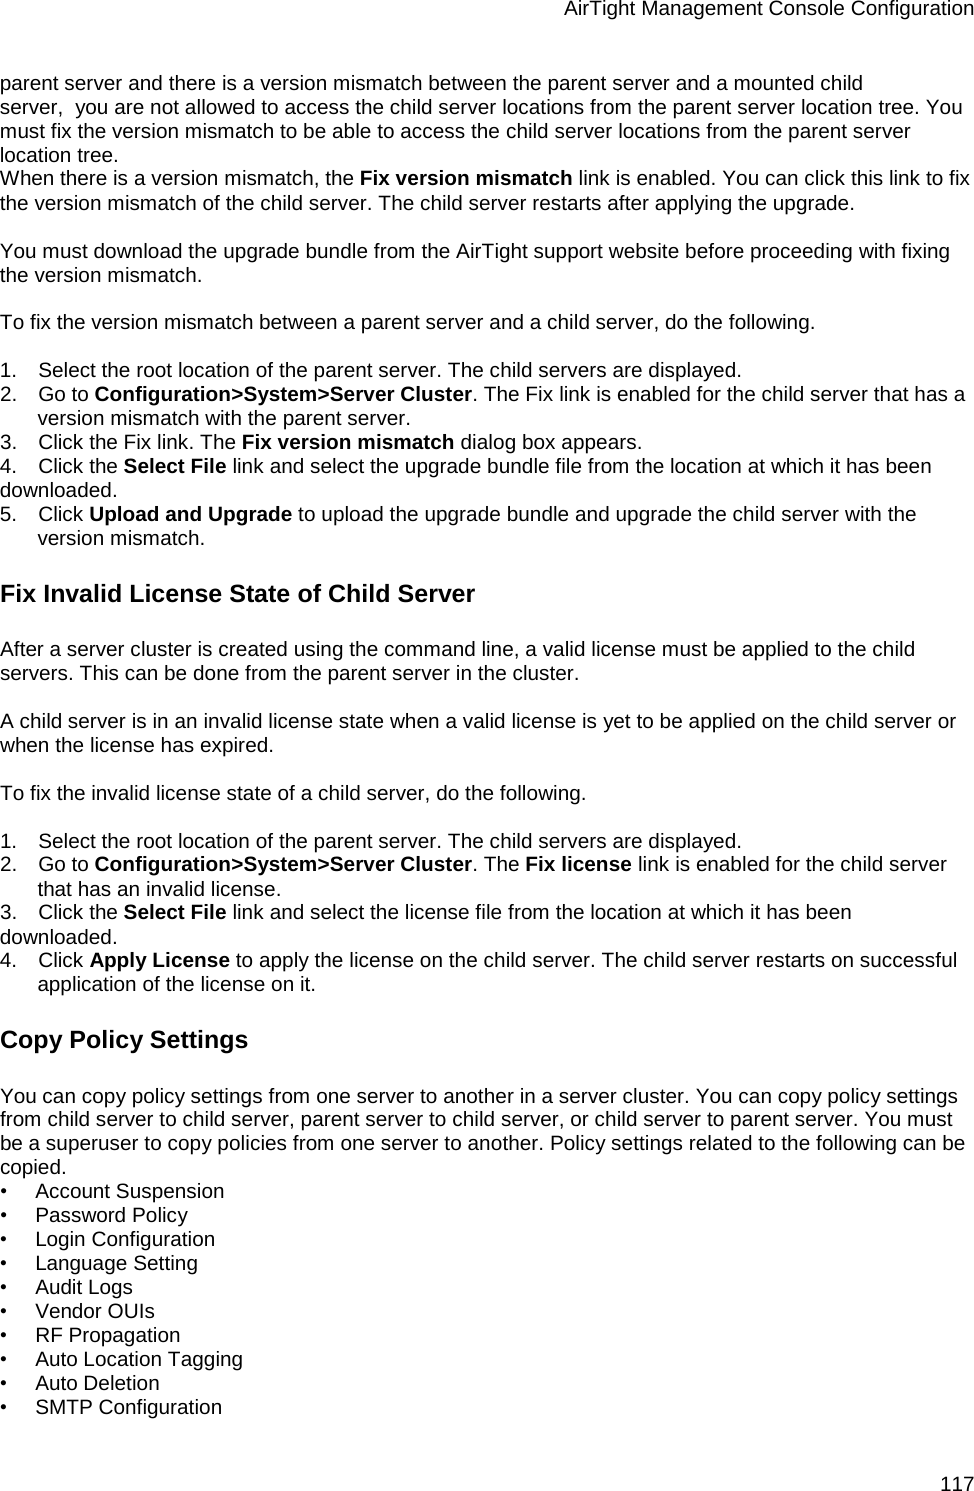 AirTight Management Console Configuration 117 parent server and there is a version mismatch between the parent server and a mounted child server,  you are not allowed to access the child server locations from the parent server location tree. You must fix the version mismatch to be able to access the child server locations from the parent server location tree. When there is a version mismatch, the Fix version mismatch link is enabled. You can click this link to fix the version mismatch of the child server. The child server restarts after applying the upgrade.   You must download the upgrade bundle from the AirTight support website before proceeding with fixing the version mismatch.   To fix the version mismatch between a parent server and a child server, do the following.   1.      Select the root location of the parent server. The child servers are displayed. 2.      Go to Configuration&gt;System&gt;Server Cluster. The Fix link is enabled for the child server that has a version mismatch with the parent server. 3.      Click the Fix link. The Fix version mismatch dialog box appears. 4.      Click the Select File link and select the upgrade bundle file from the location at which it has been downloaded. 5.      Click Upload and Upgrade to upload the upgrade bundle and upgrade the child server with the version mismatch.  Fix Invalid License State of Child Server After a server cluster is created using the command line, a valid license must be applied to the child servers. This can be done from the parent server in the cluster.   A child server is in an invalid license state when a valid license is yet to be applied on the child server or when the license has expired.    To fix the invalid license state of a child server, do the following.   1.      Select the root location of the parent server. The child servers are displayed. 2.      Go to Configuration&gt;System&gt;Server Cluster. The Fix license link is enabled for the child server that has an invalid license. 3.      Click the Select File link and select the license file from the location at which it has been downloaded. 4.      Click Apply License to apply the license on the child server. The child server restarts on successful application of the license on it. Copy Policy Settings You can copy policy settings from one server to another in a server cluster. You can copy policy settings from child server to child server, parent server to child server, or child server to parent server. You must be a superuser to copy policies from one server to another. Policy settings related to the following can be copied. •        Account Suspension •        Password Policy •        Login Configuration •        Language Setting •        Audit Logs •        Vendor OUIs •        RF Propagation •        Auto Location Tagging •        Auto Deletion •        SMTP Configuration 